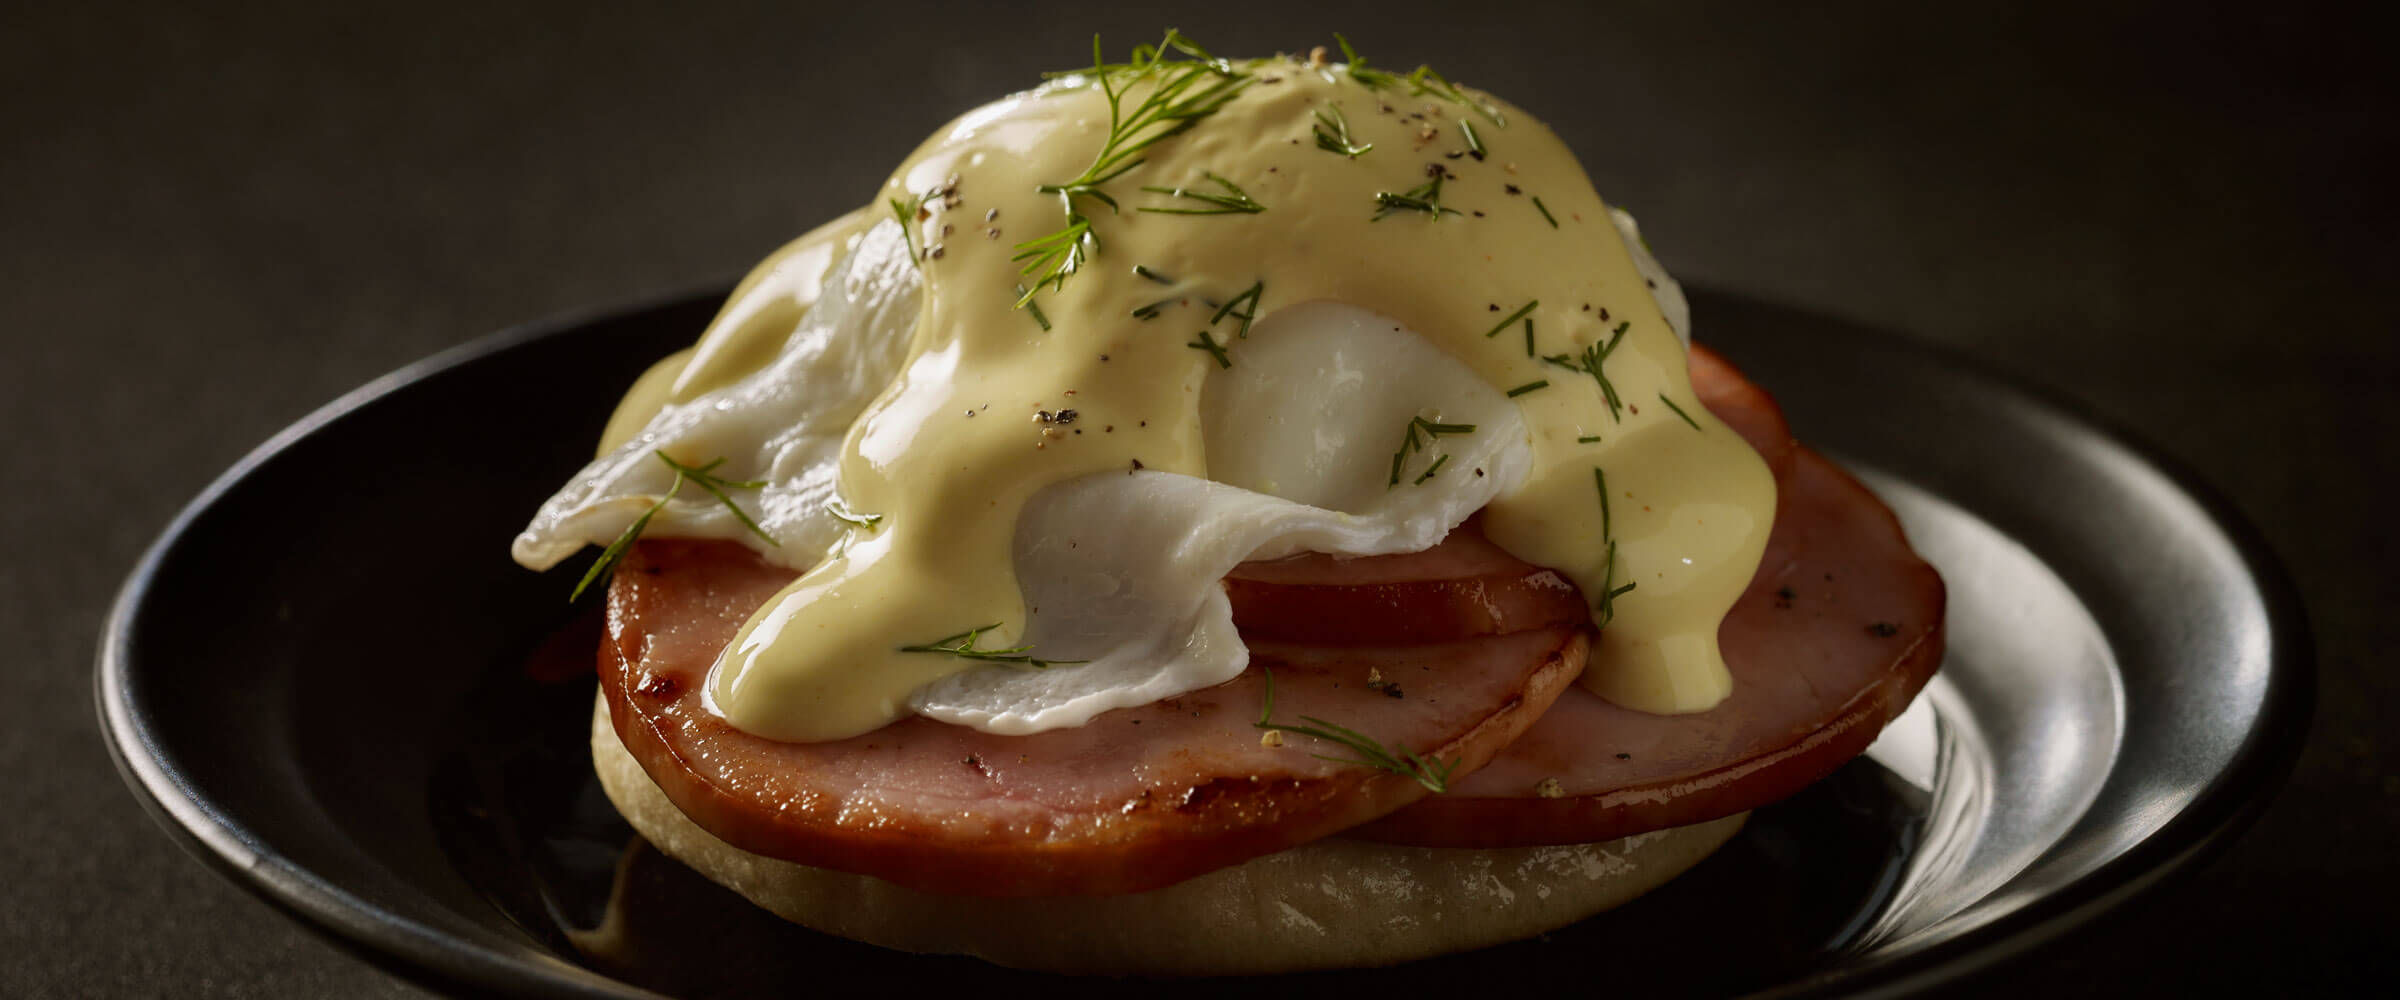 Canadian Bacon Eggs Benedict on black plate